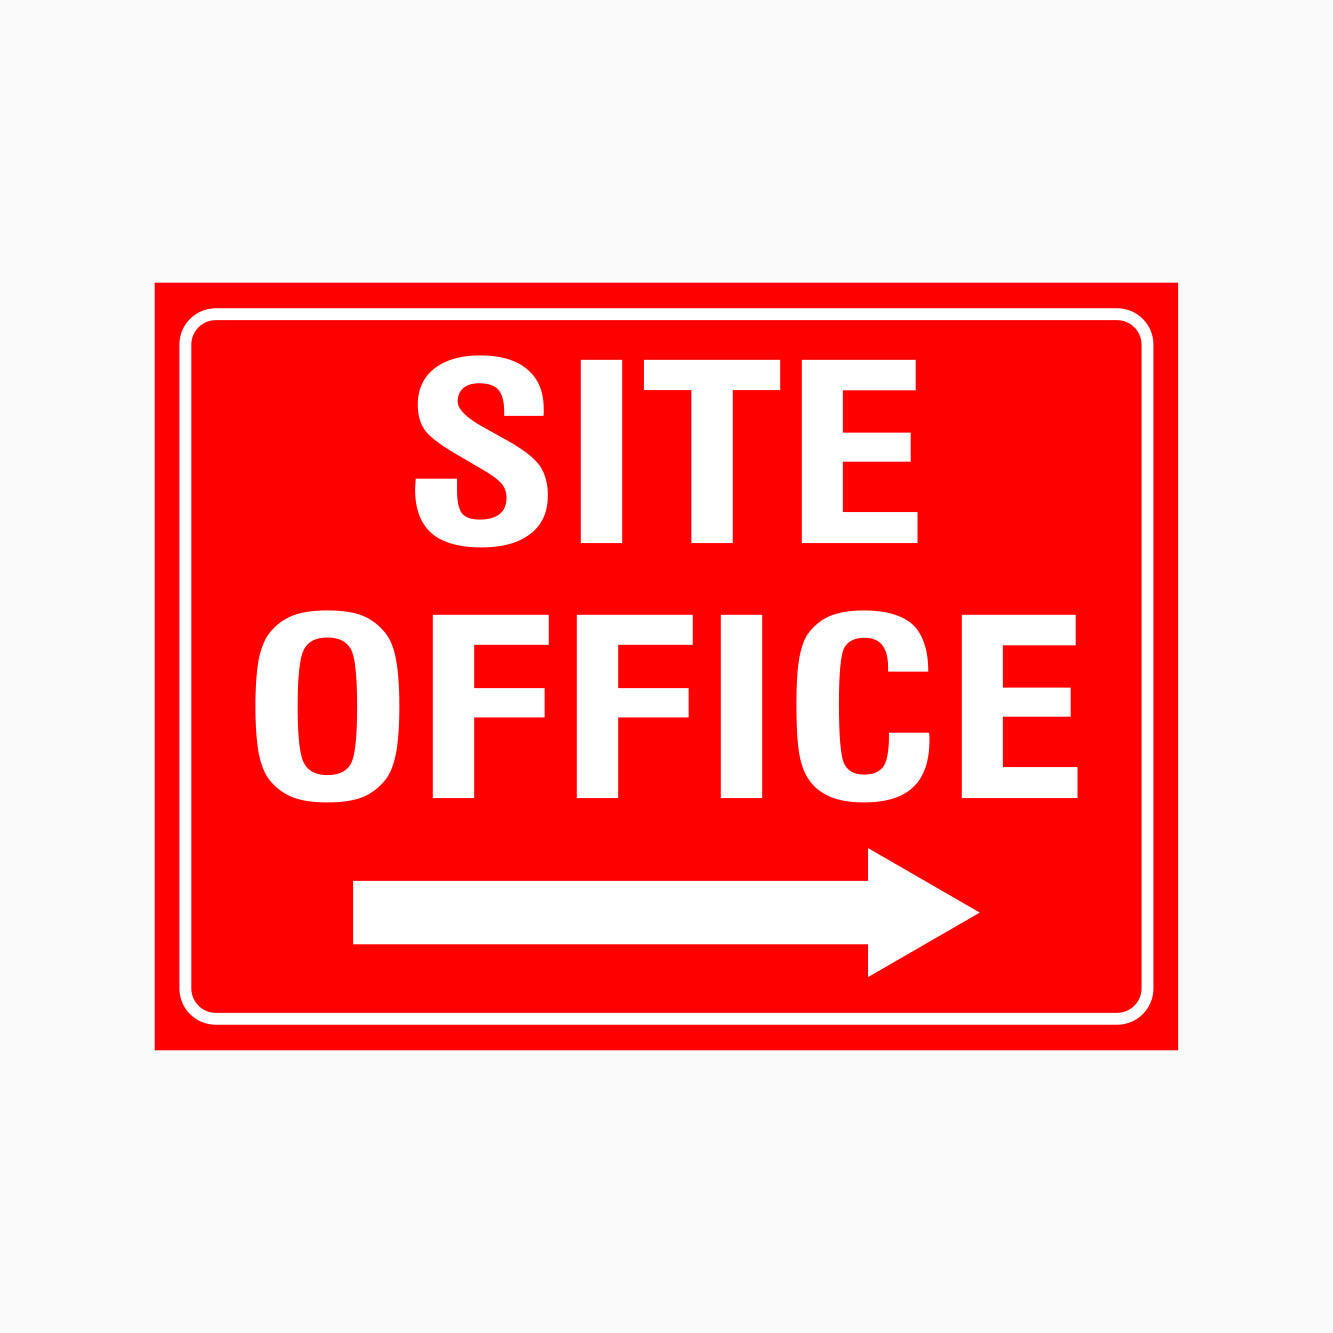 SITE OFFICE SIGN - Right Arrow - GET SIGNS